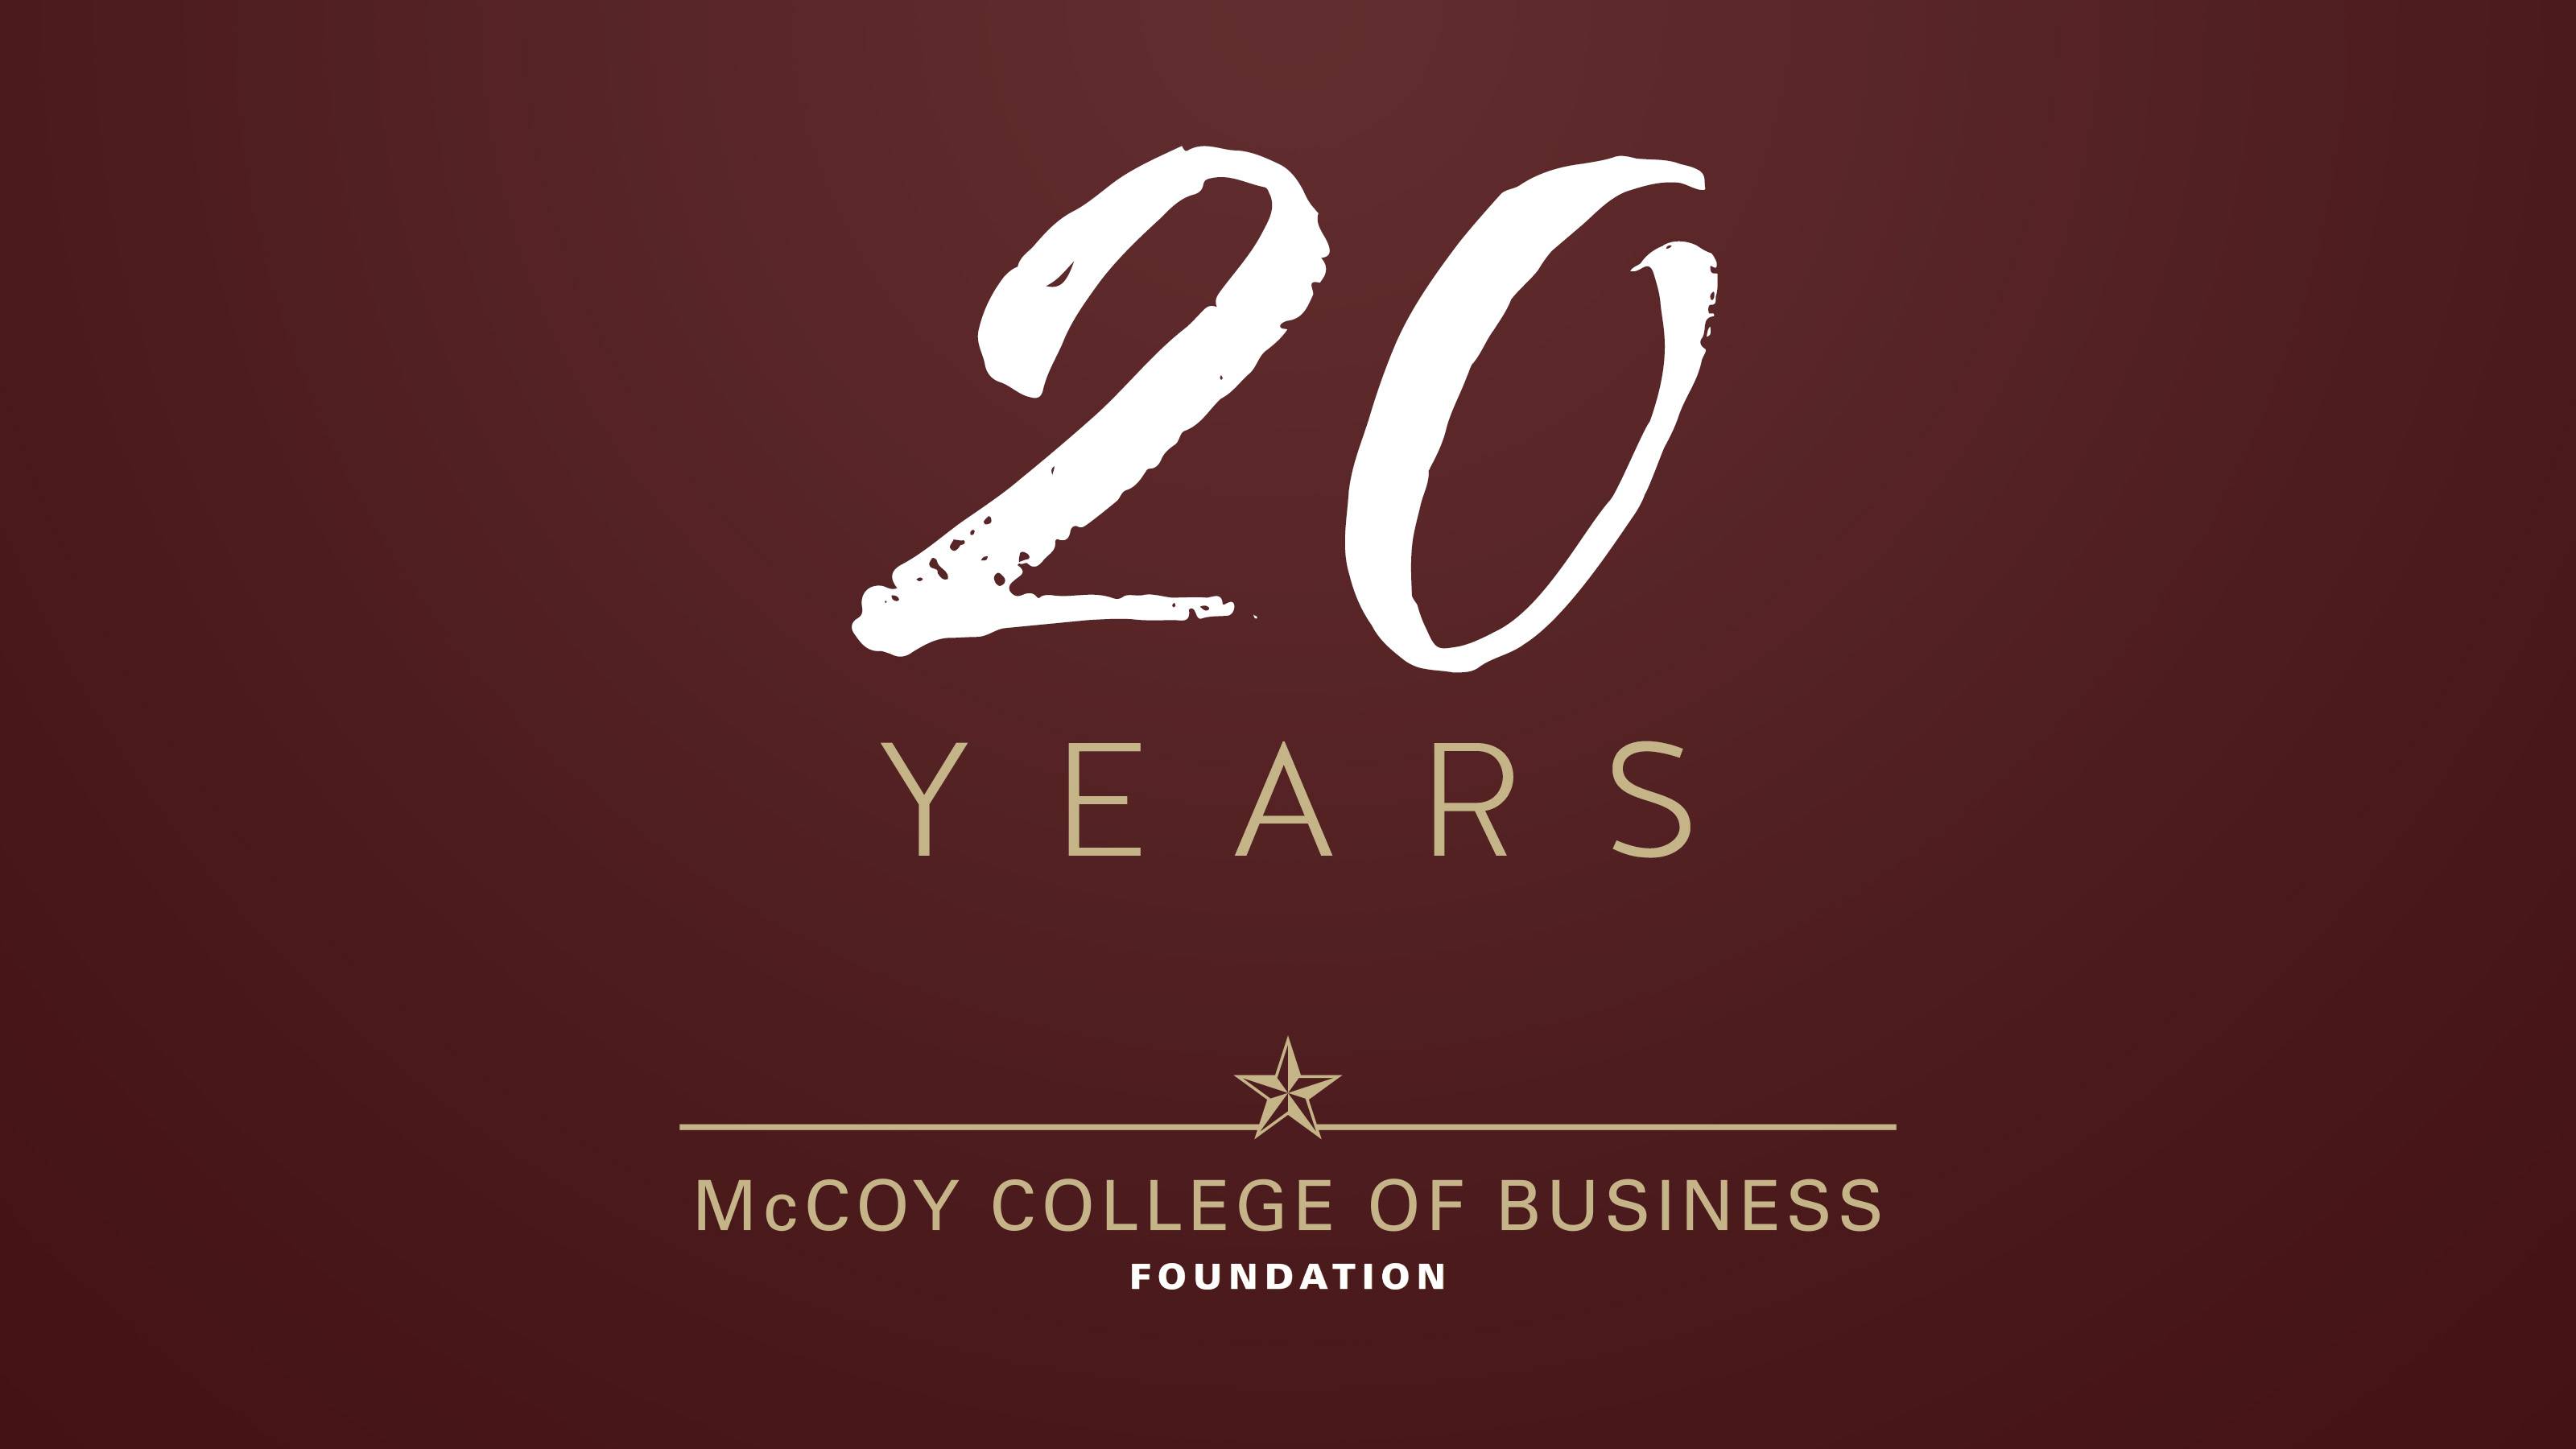 Maroon graphic with white and gold text that reads, "Twenty years. McCoy College of Business Foundation."